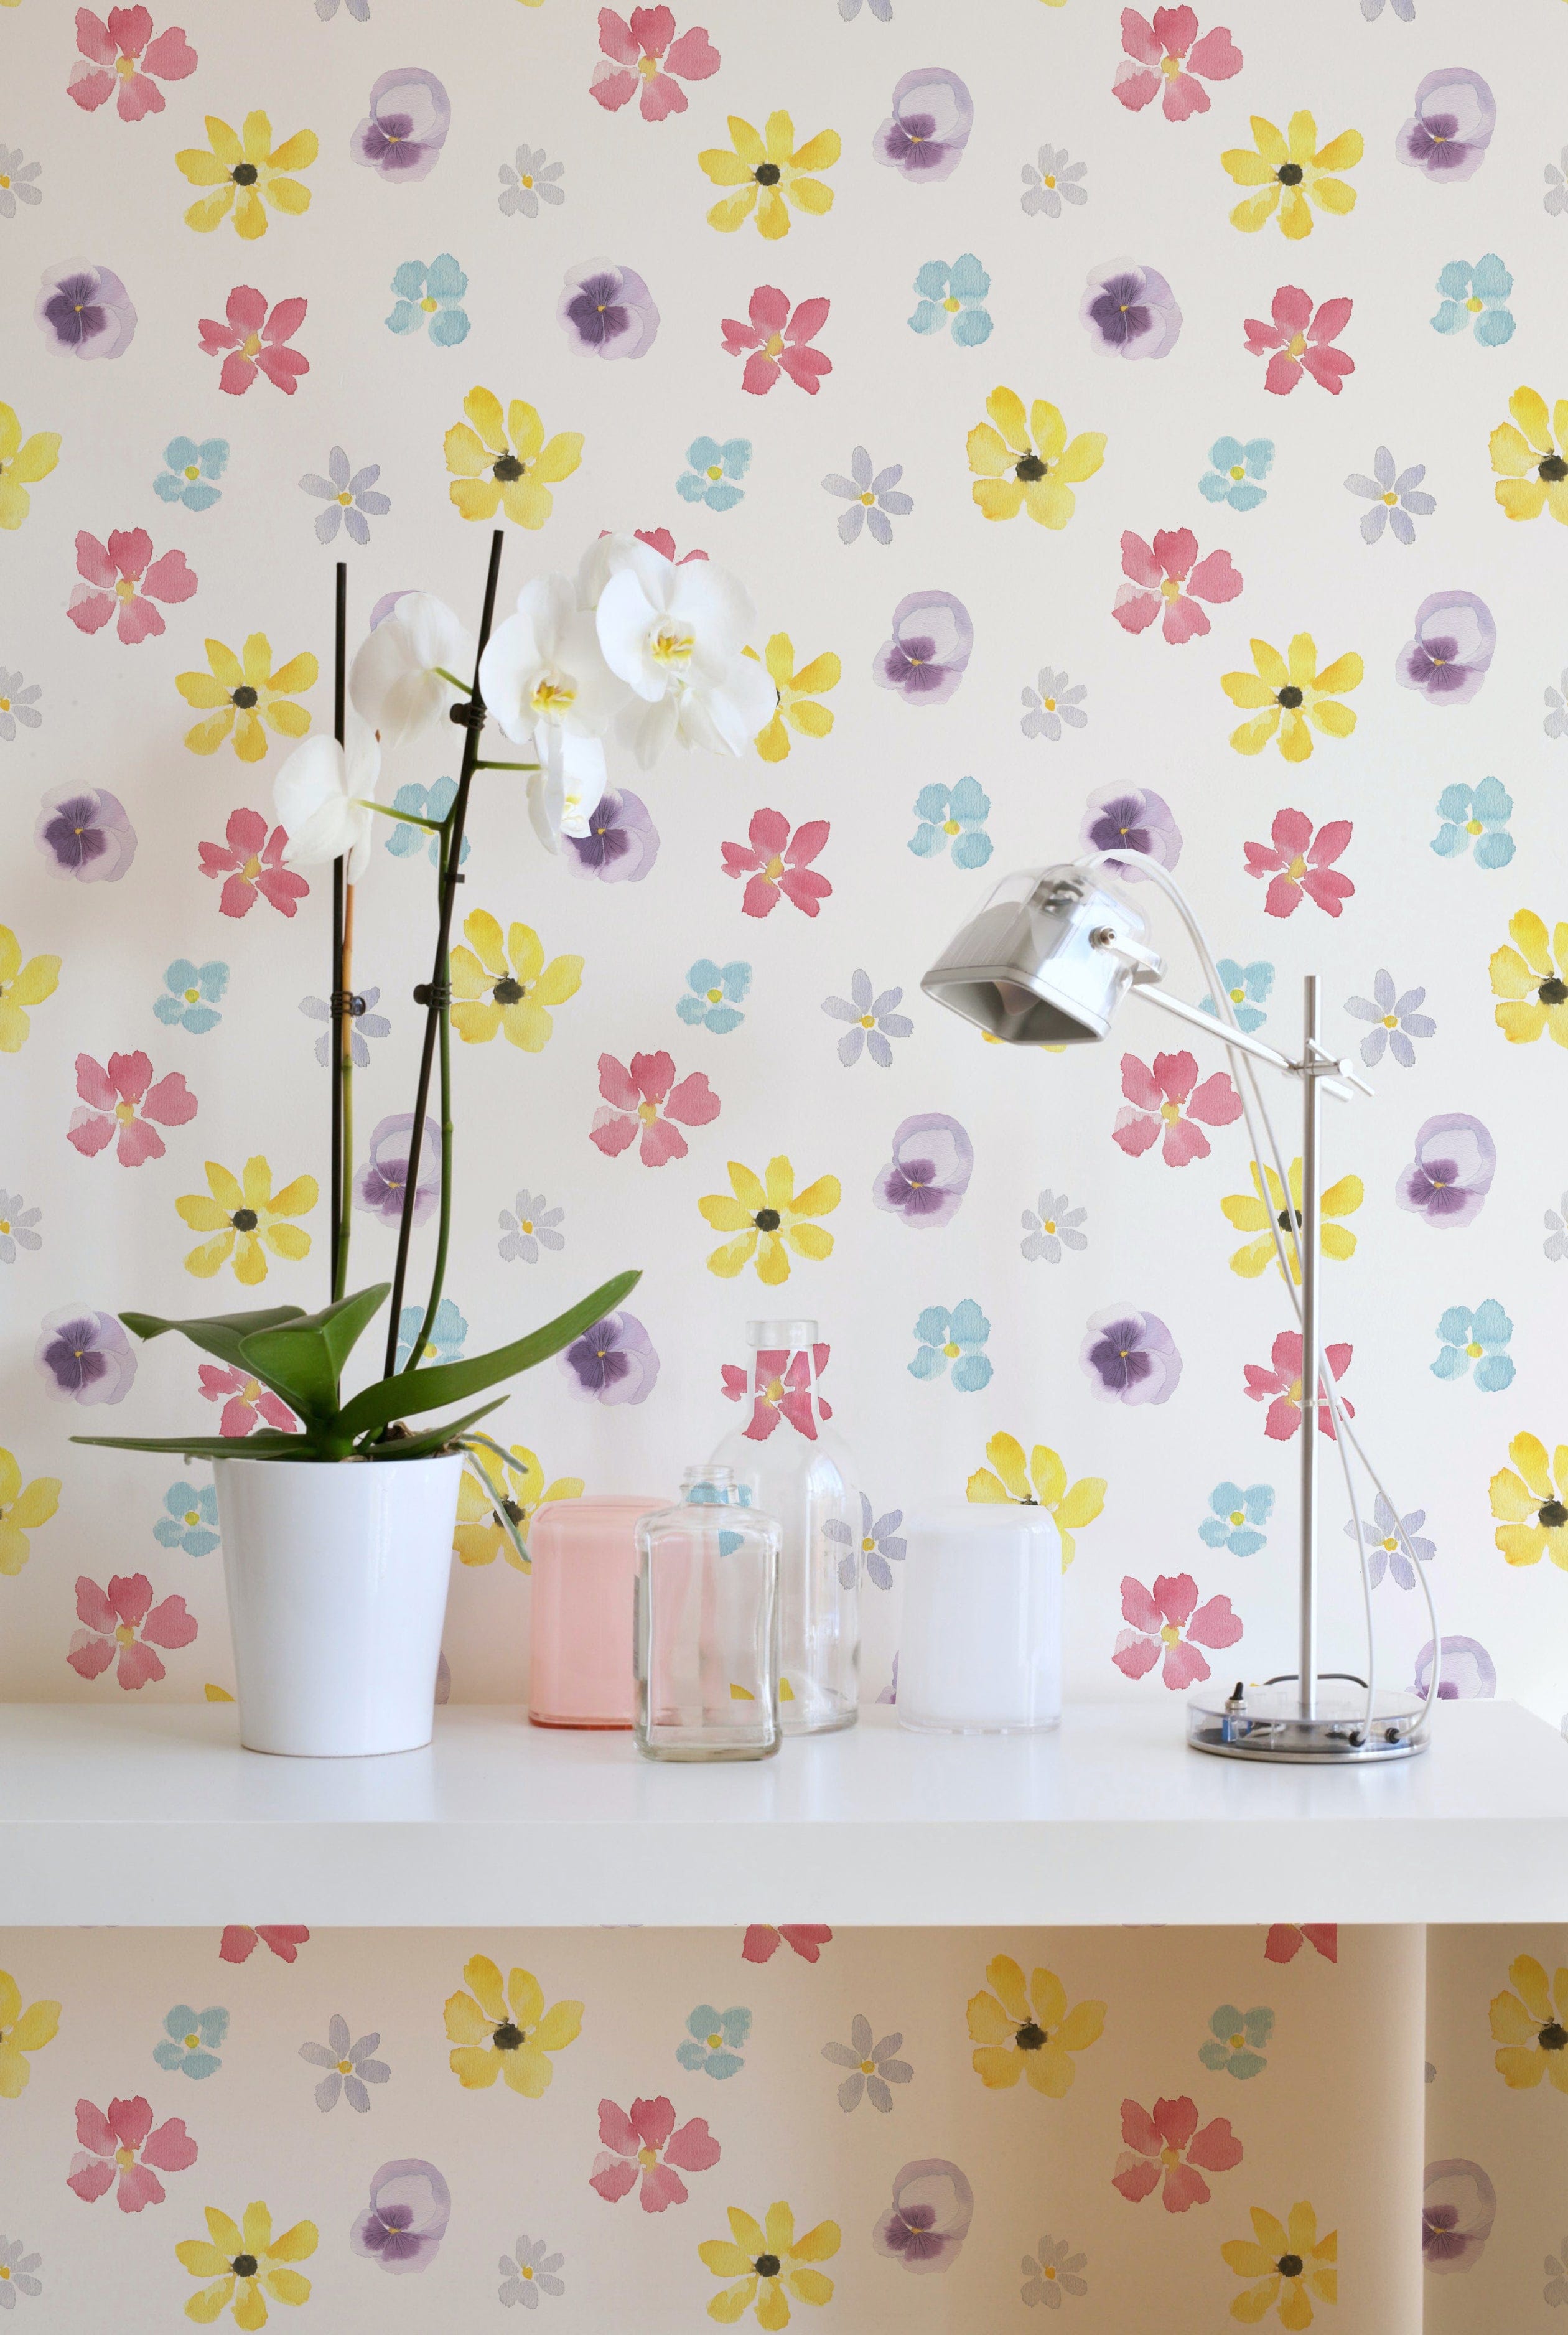 A cozy room featuring the Spring Field Wallpaper - VI with a cheerful pattern of colorful watercolor-style flowers in yellow, pink, purple, and blue on a white background. The decor includes a white orchid in a pot and a sleek metallic desk lamp on a white desk.